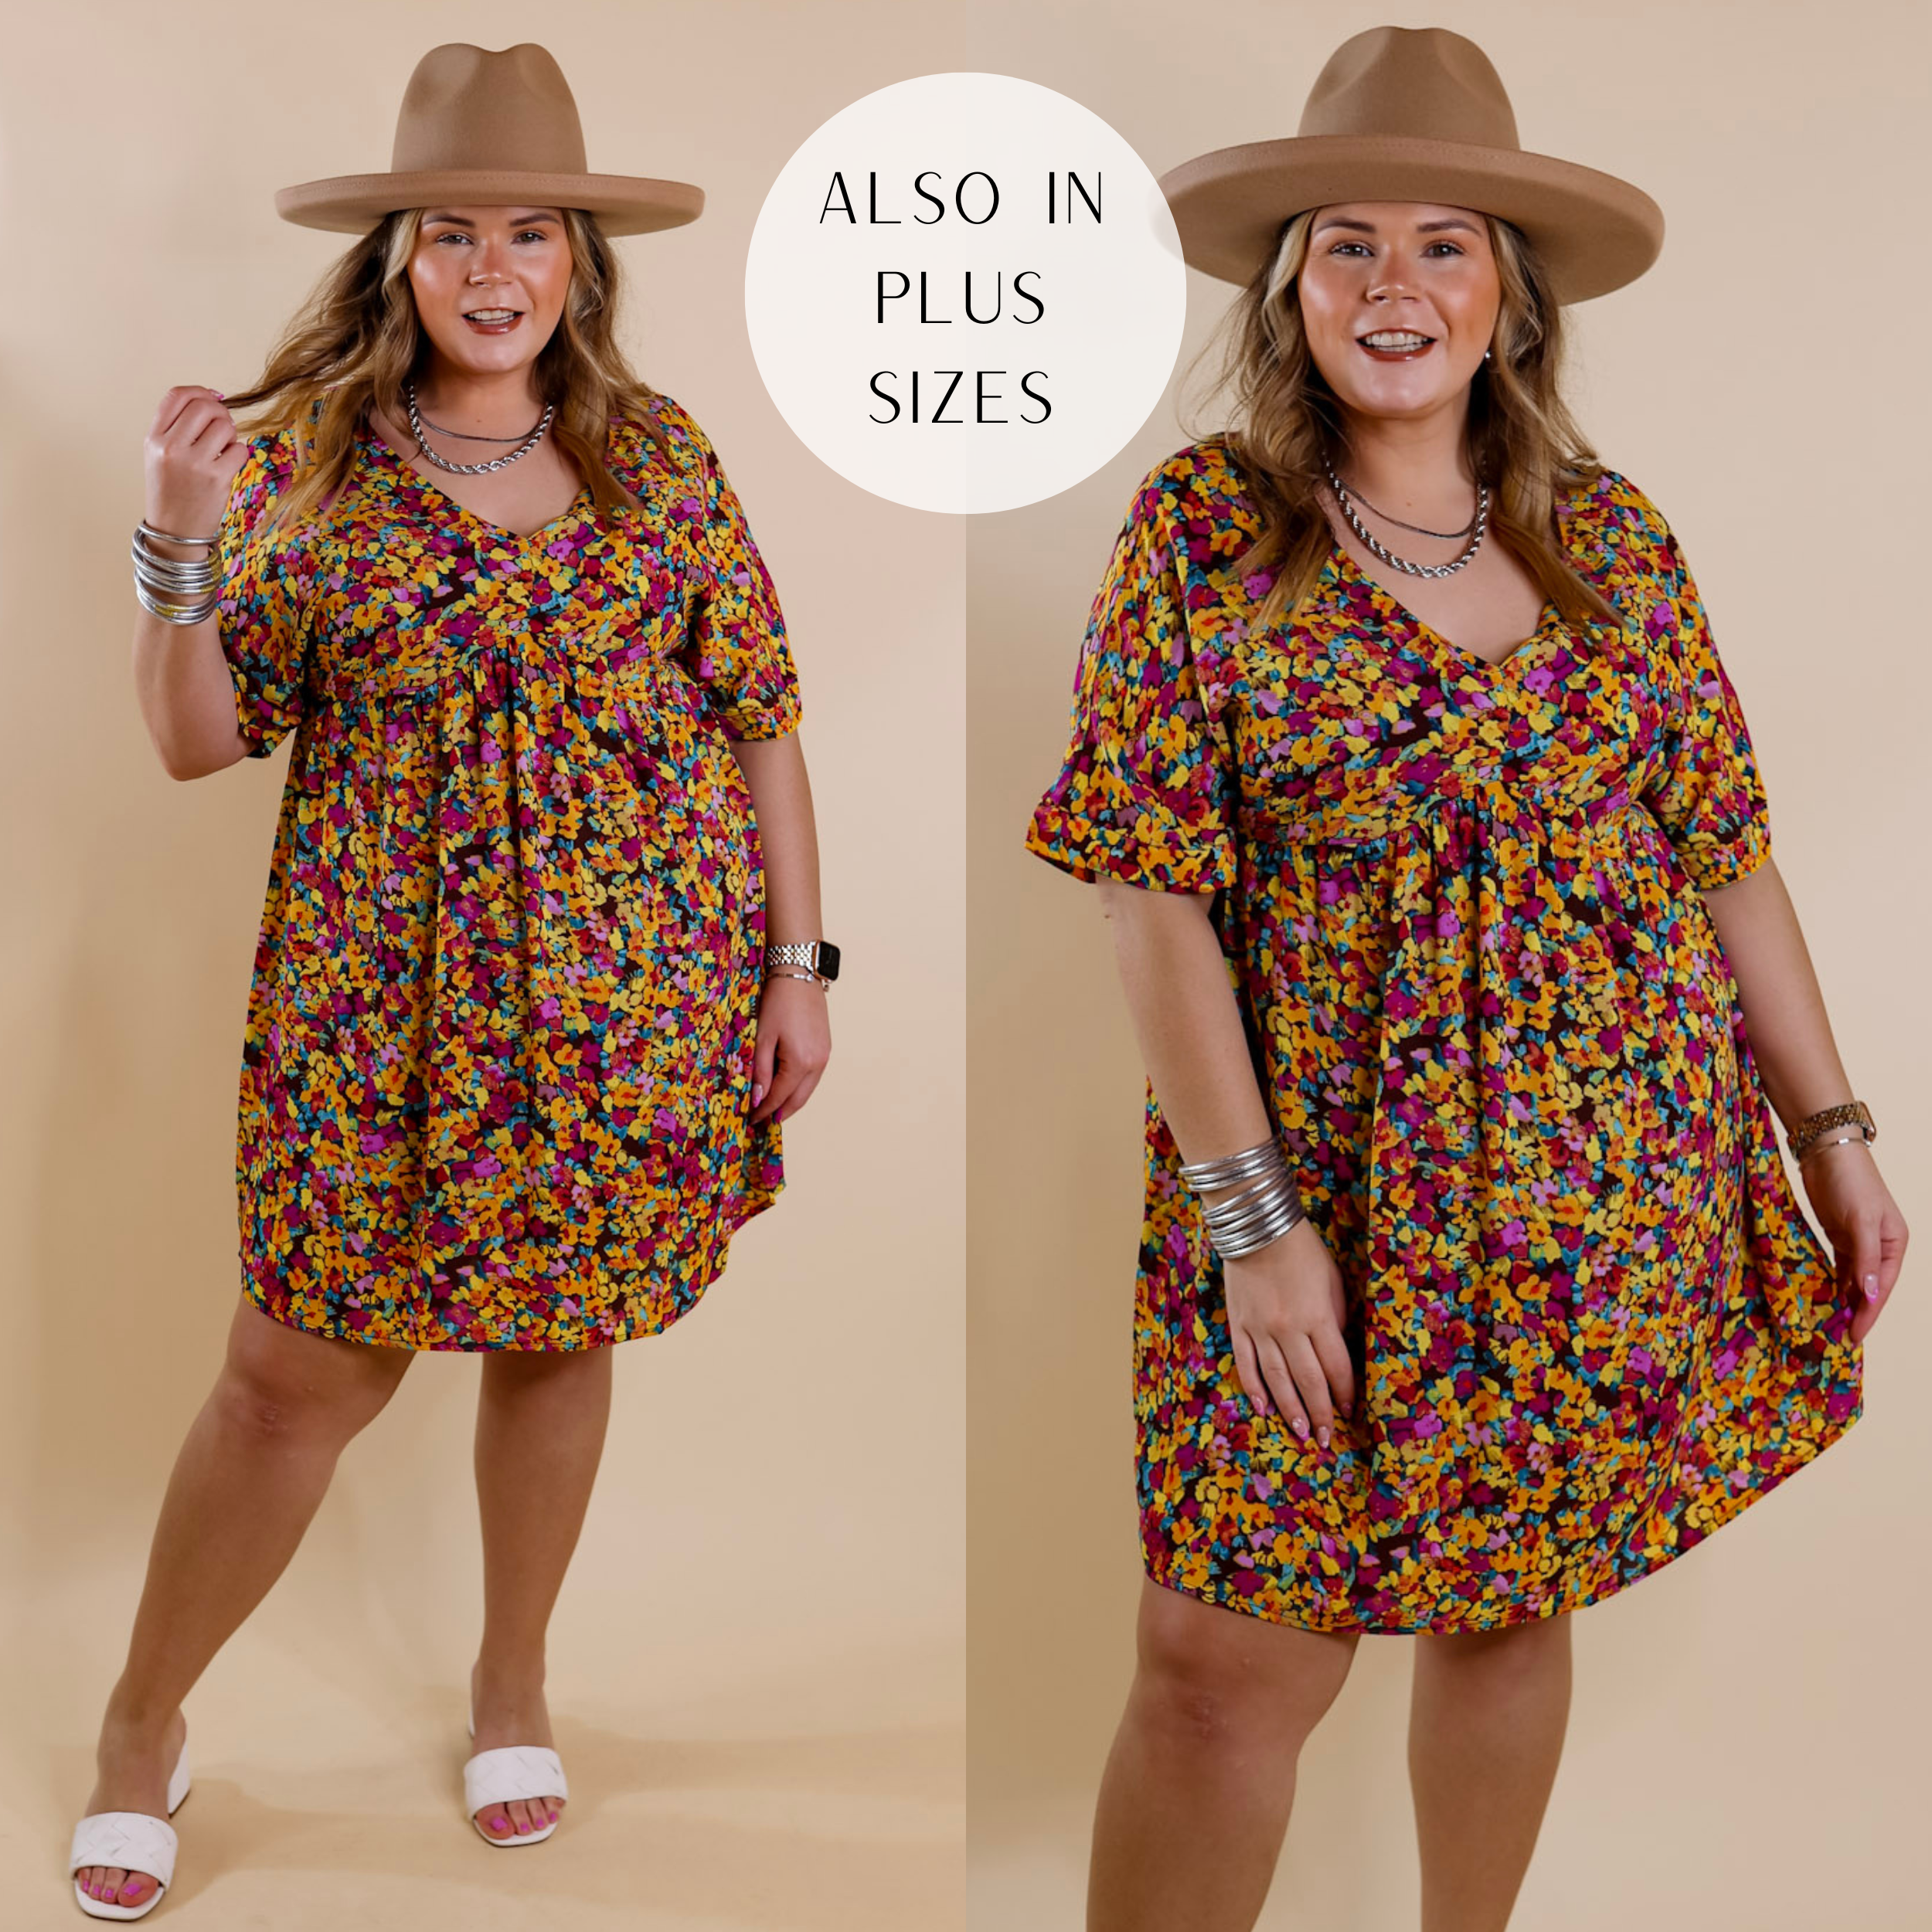 Model is wearing a knee-length babydoll style dress with short sleeves and a v neck. This dress is a purple floral print pattern on an brown background. Model has it paired with white sandals, silver jewelry, and a brown hat.